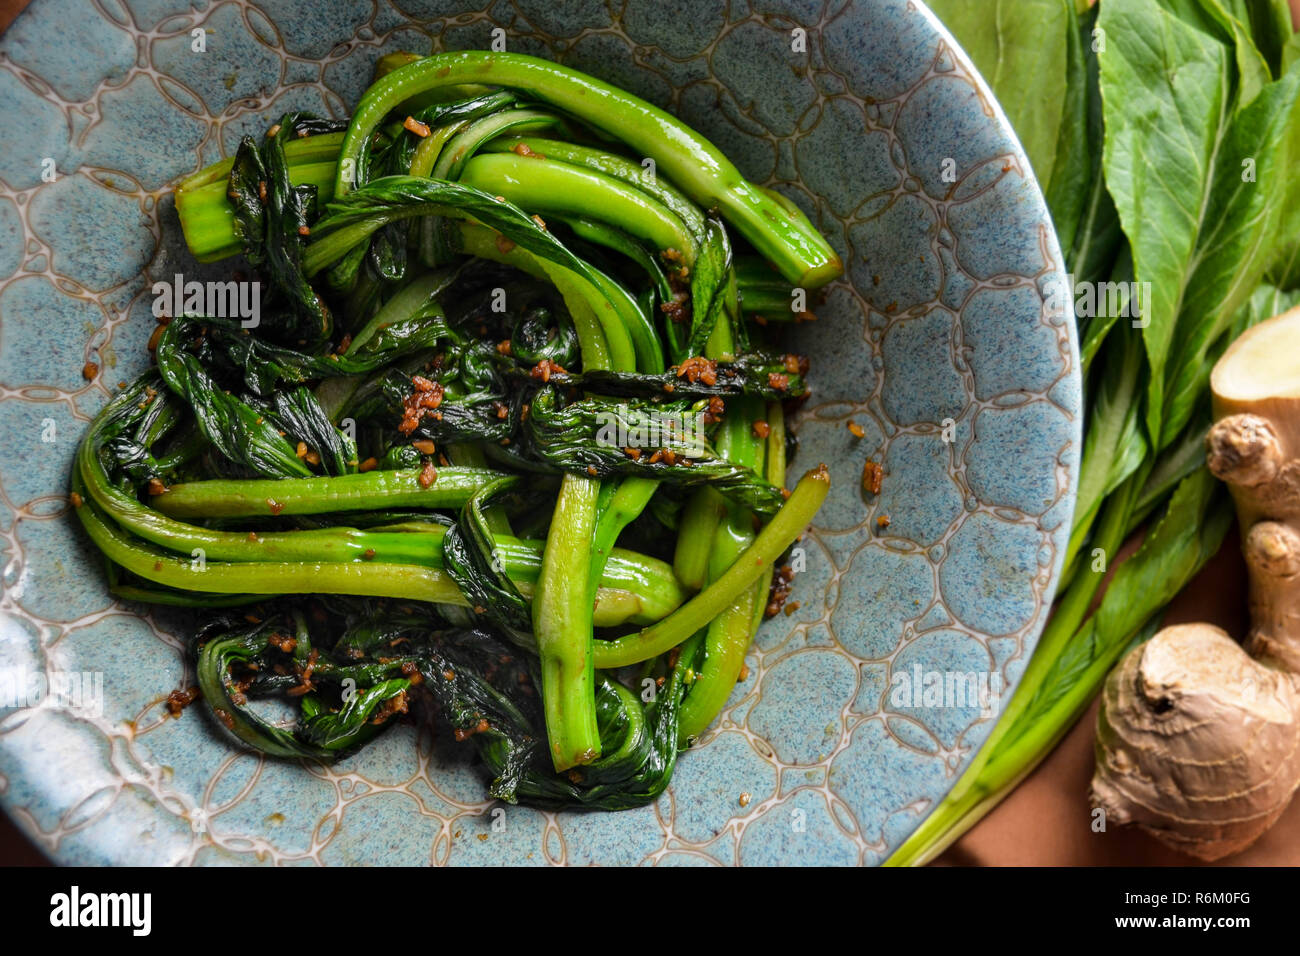 Stir-fried Choy Sum (caixin) with garlic and ginger (Chinese cooking) Stock Photo